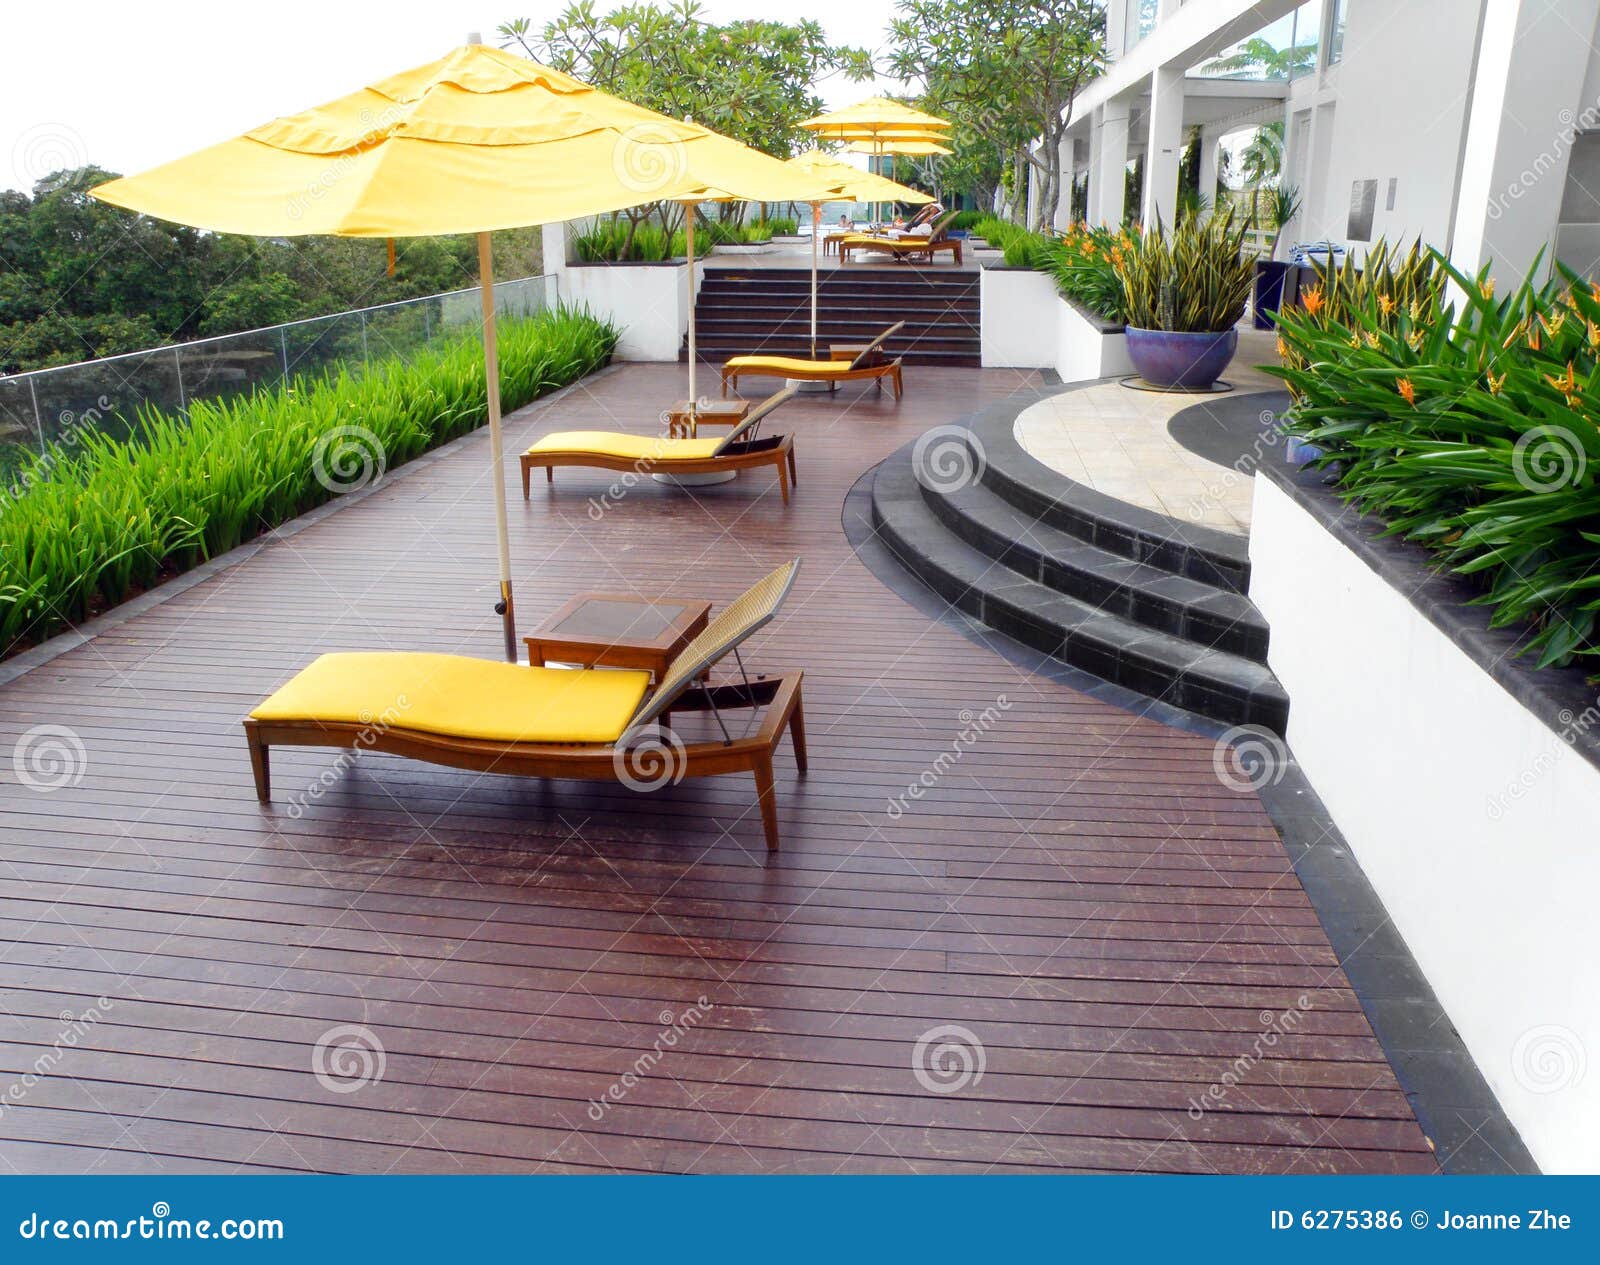 Roof Top Garden Design Royalty Free Stock Image - Image: 6275386